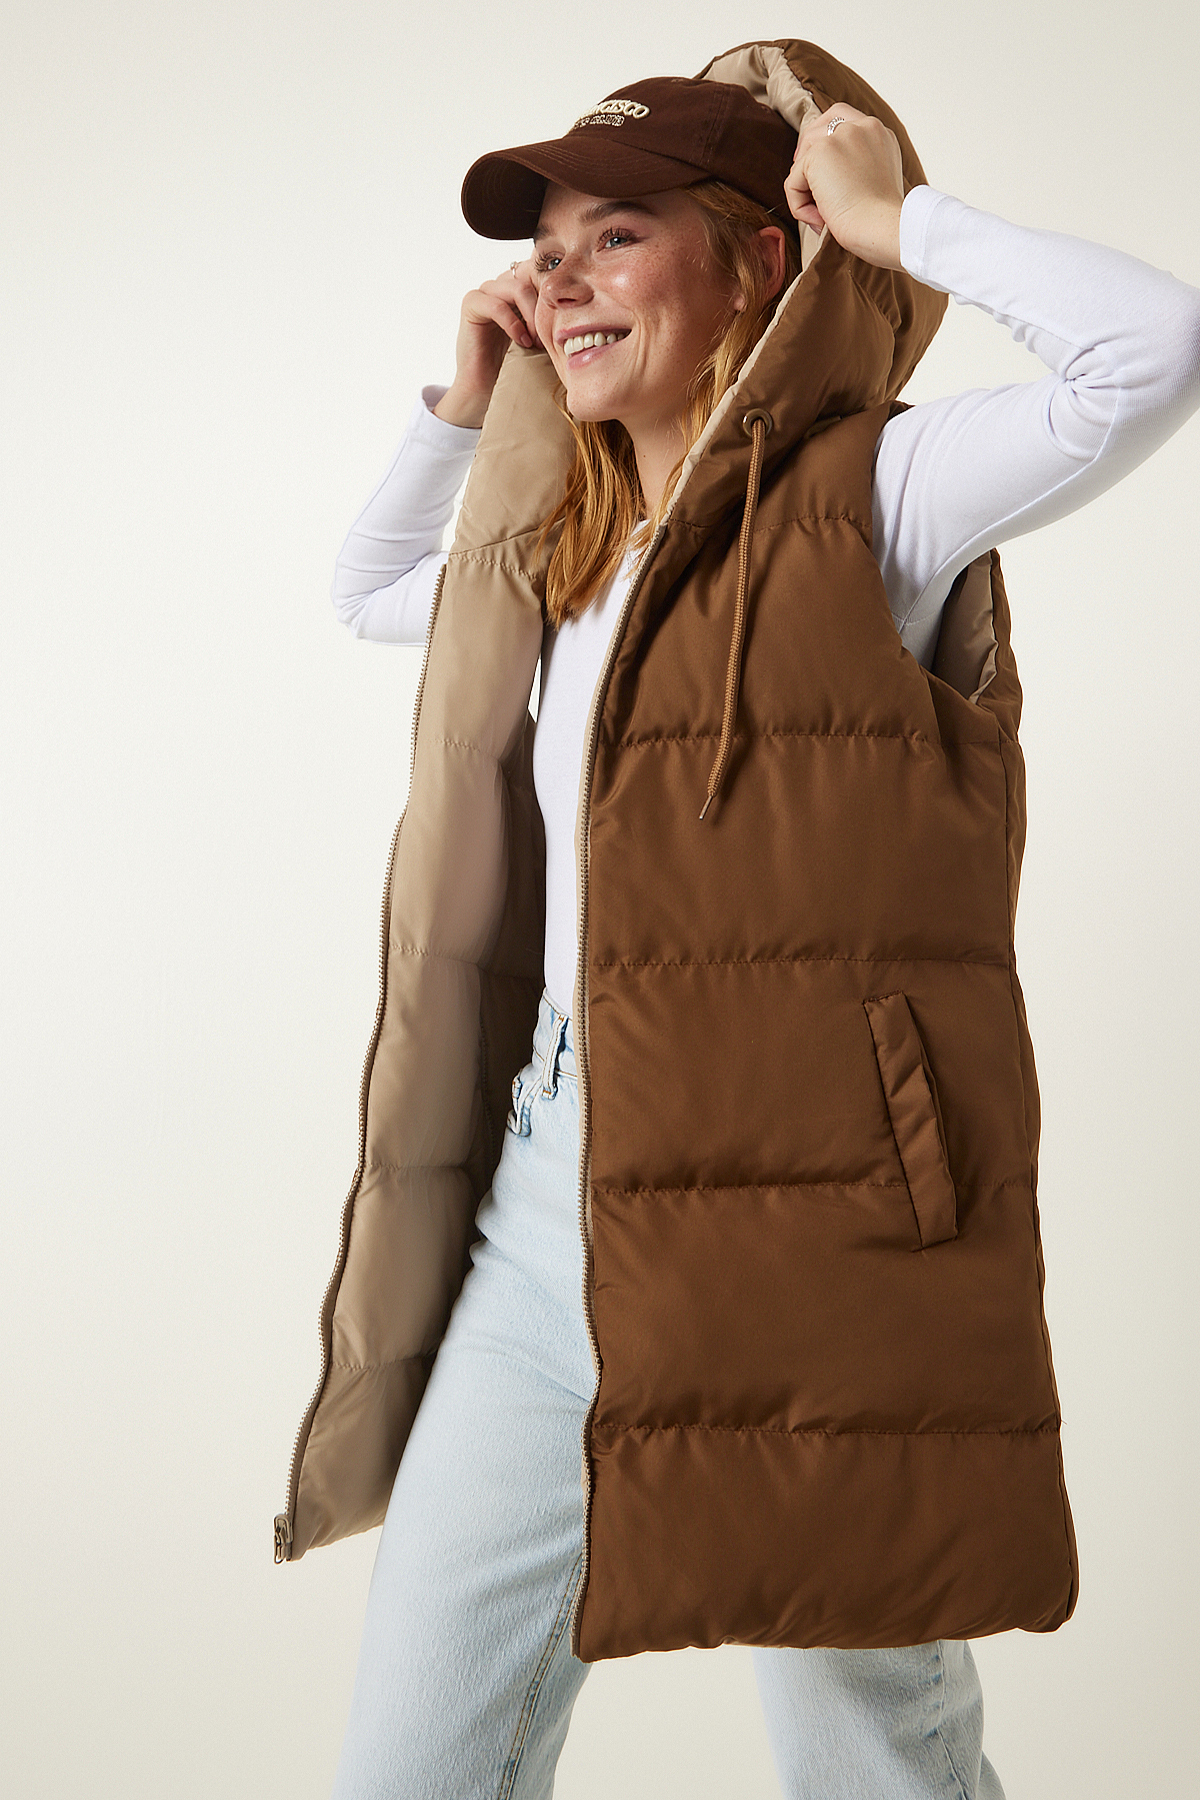 Happiness İstanbul Women's Beige Camel Hooded Reversible Puffer Vest